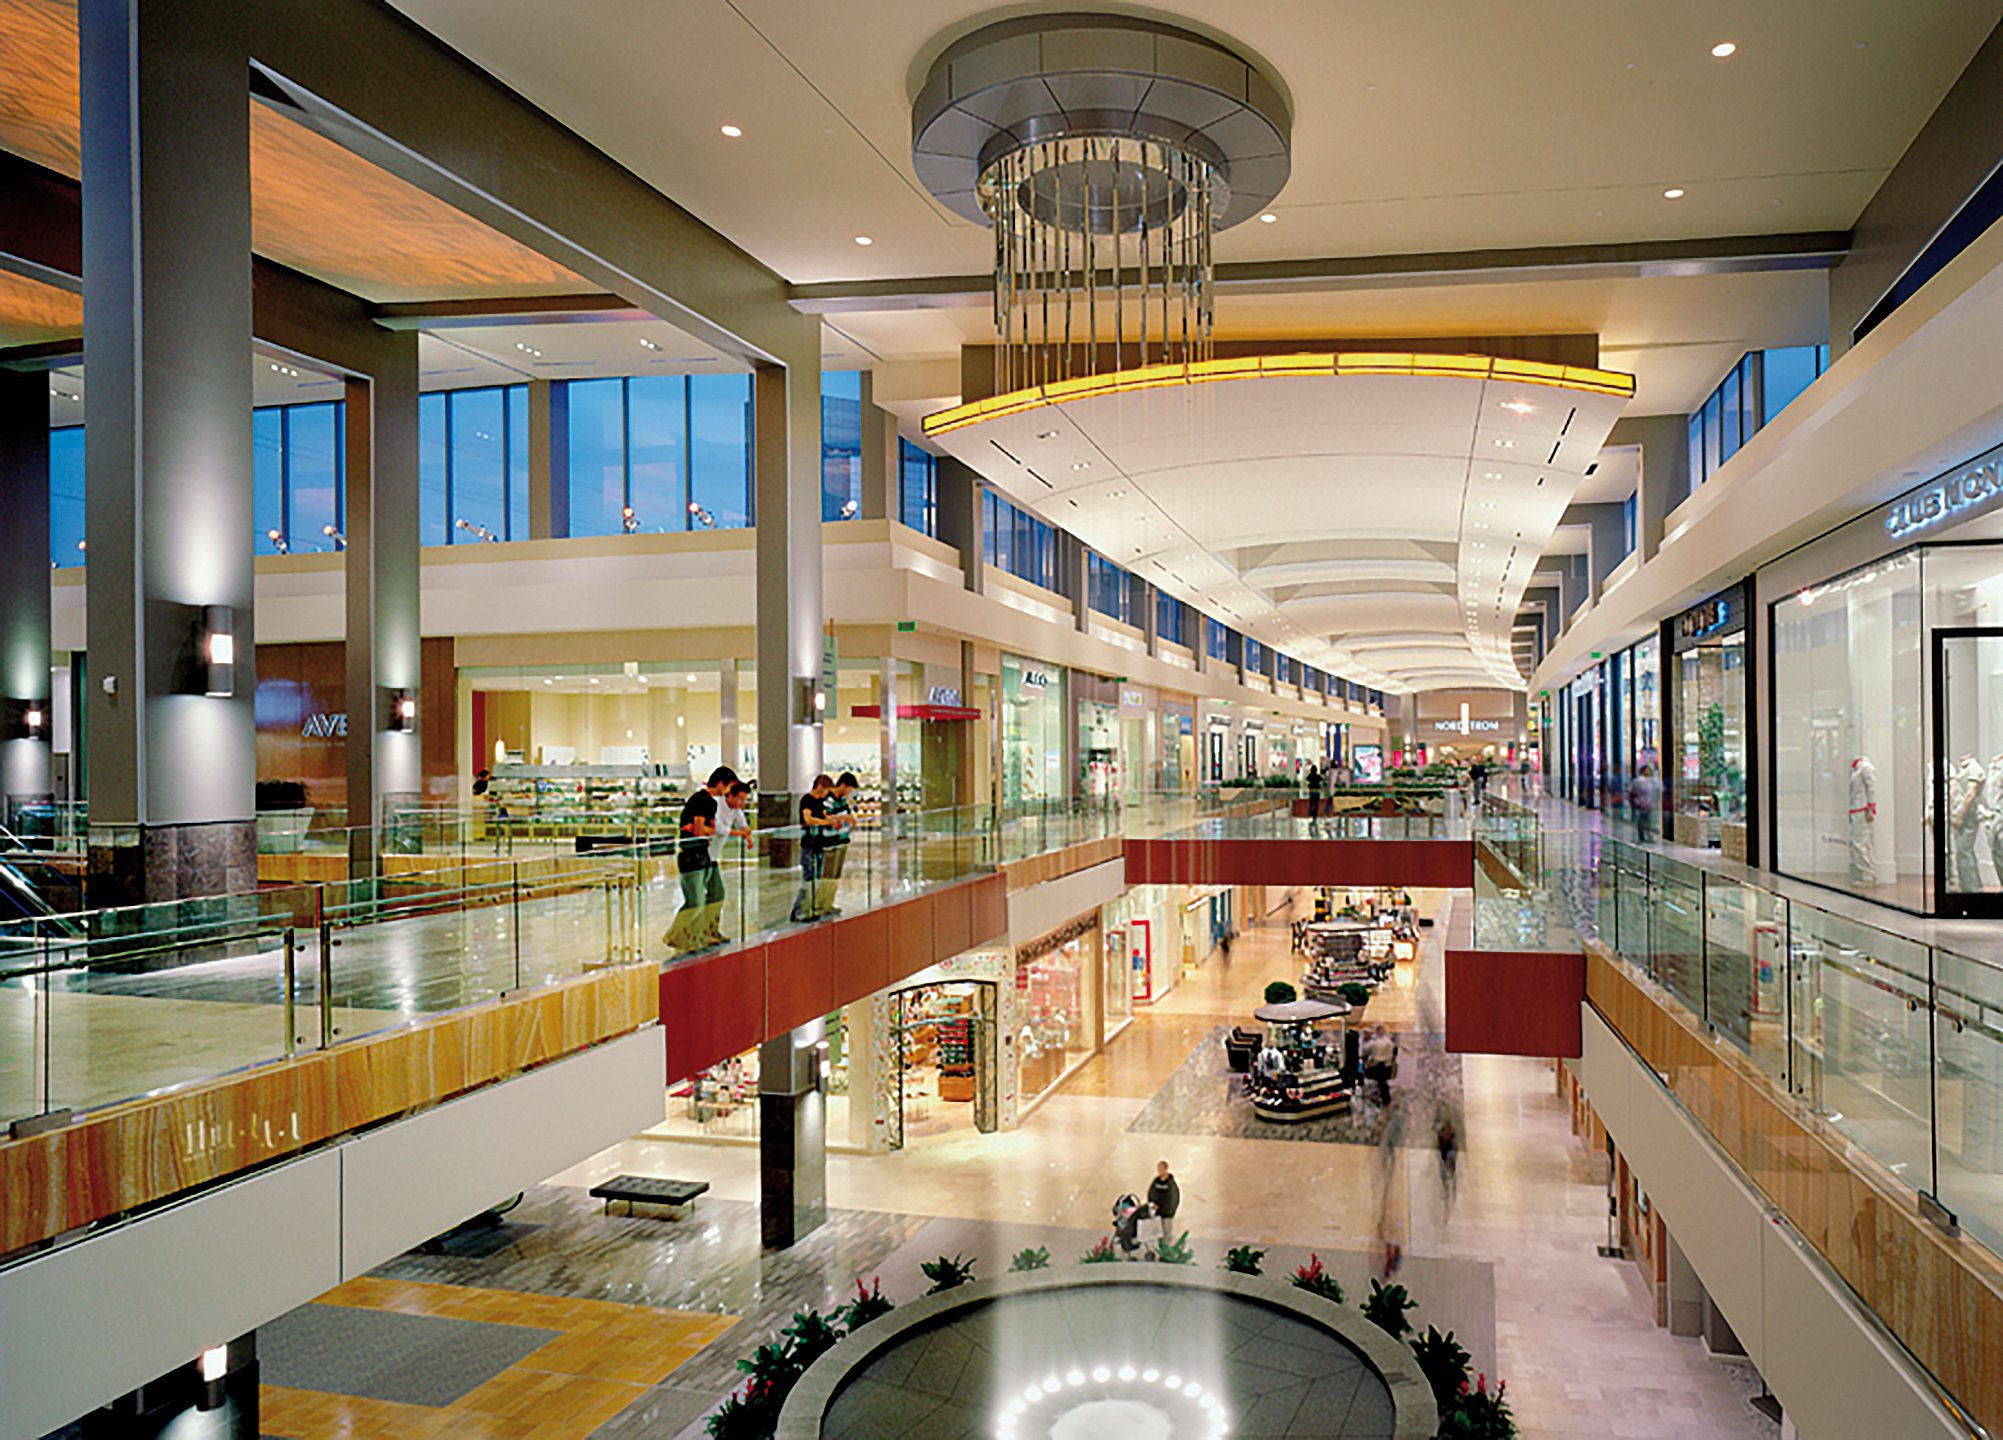 Houston Galleria Renovation & Expansion - Cooper Carry